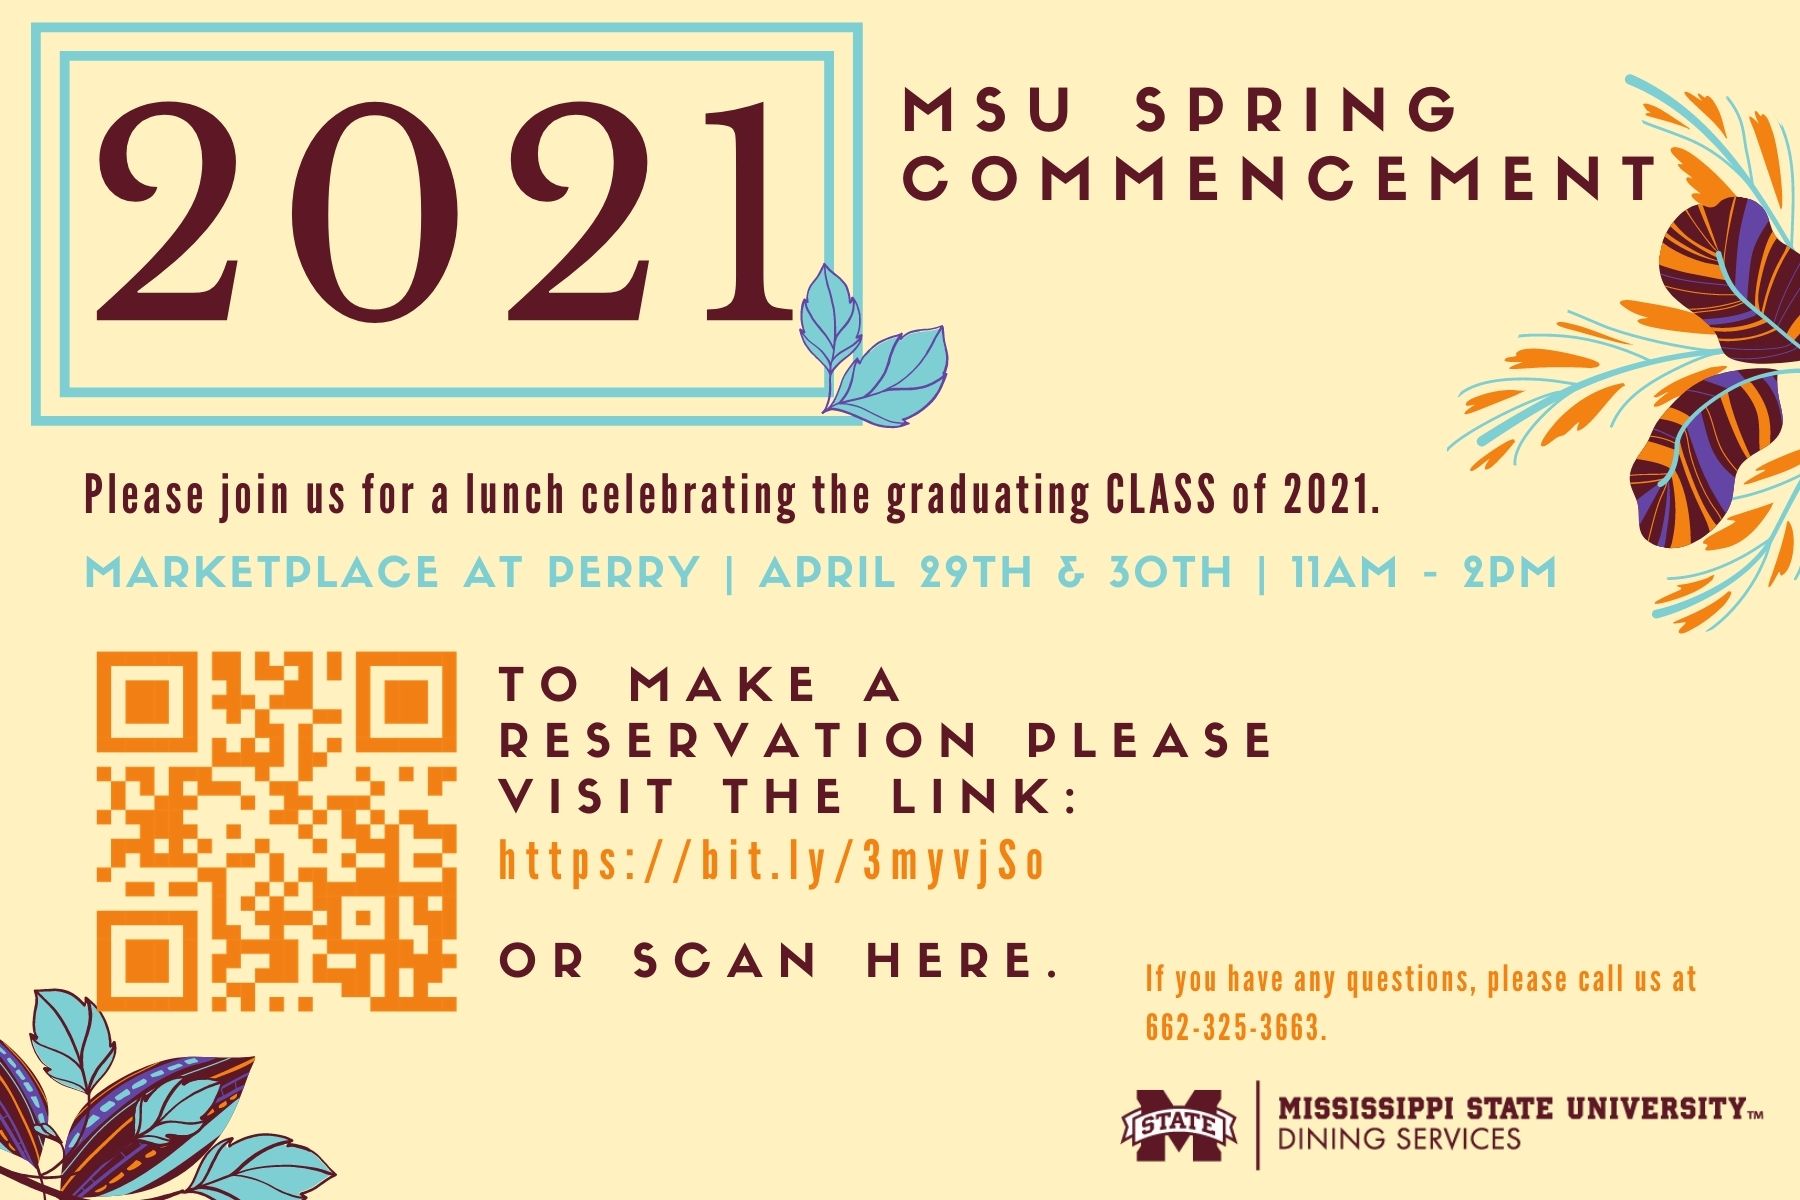 Spring 2021 Commencement Lunch